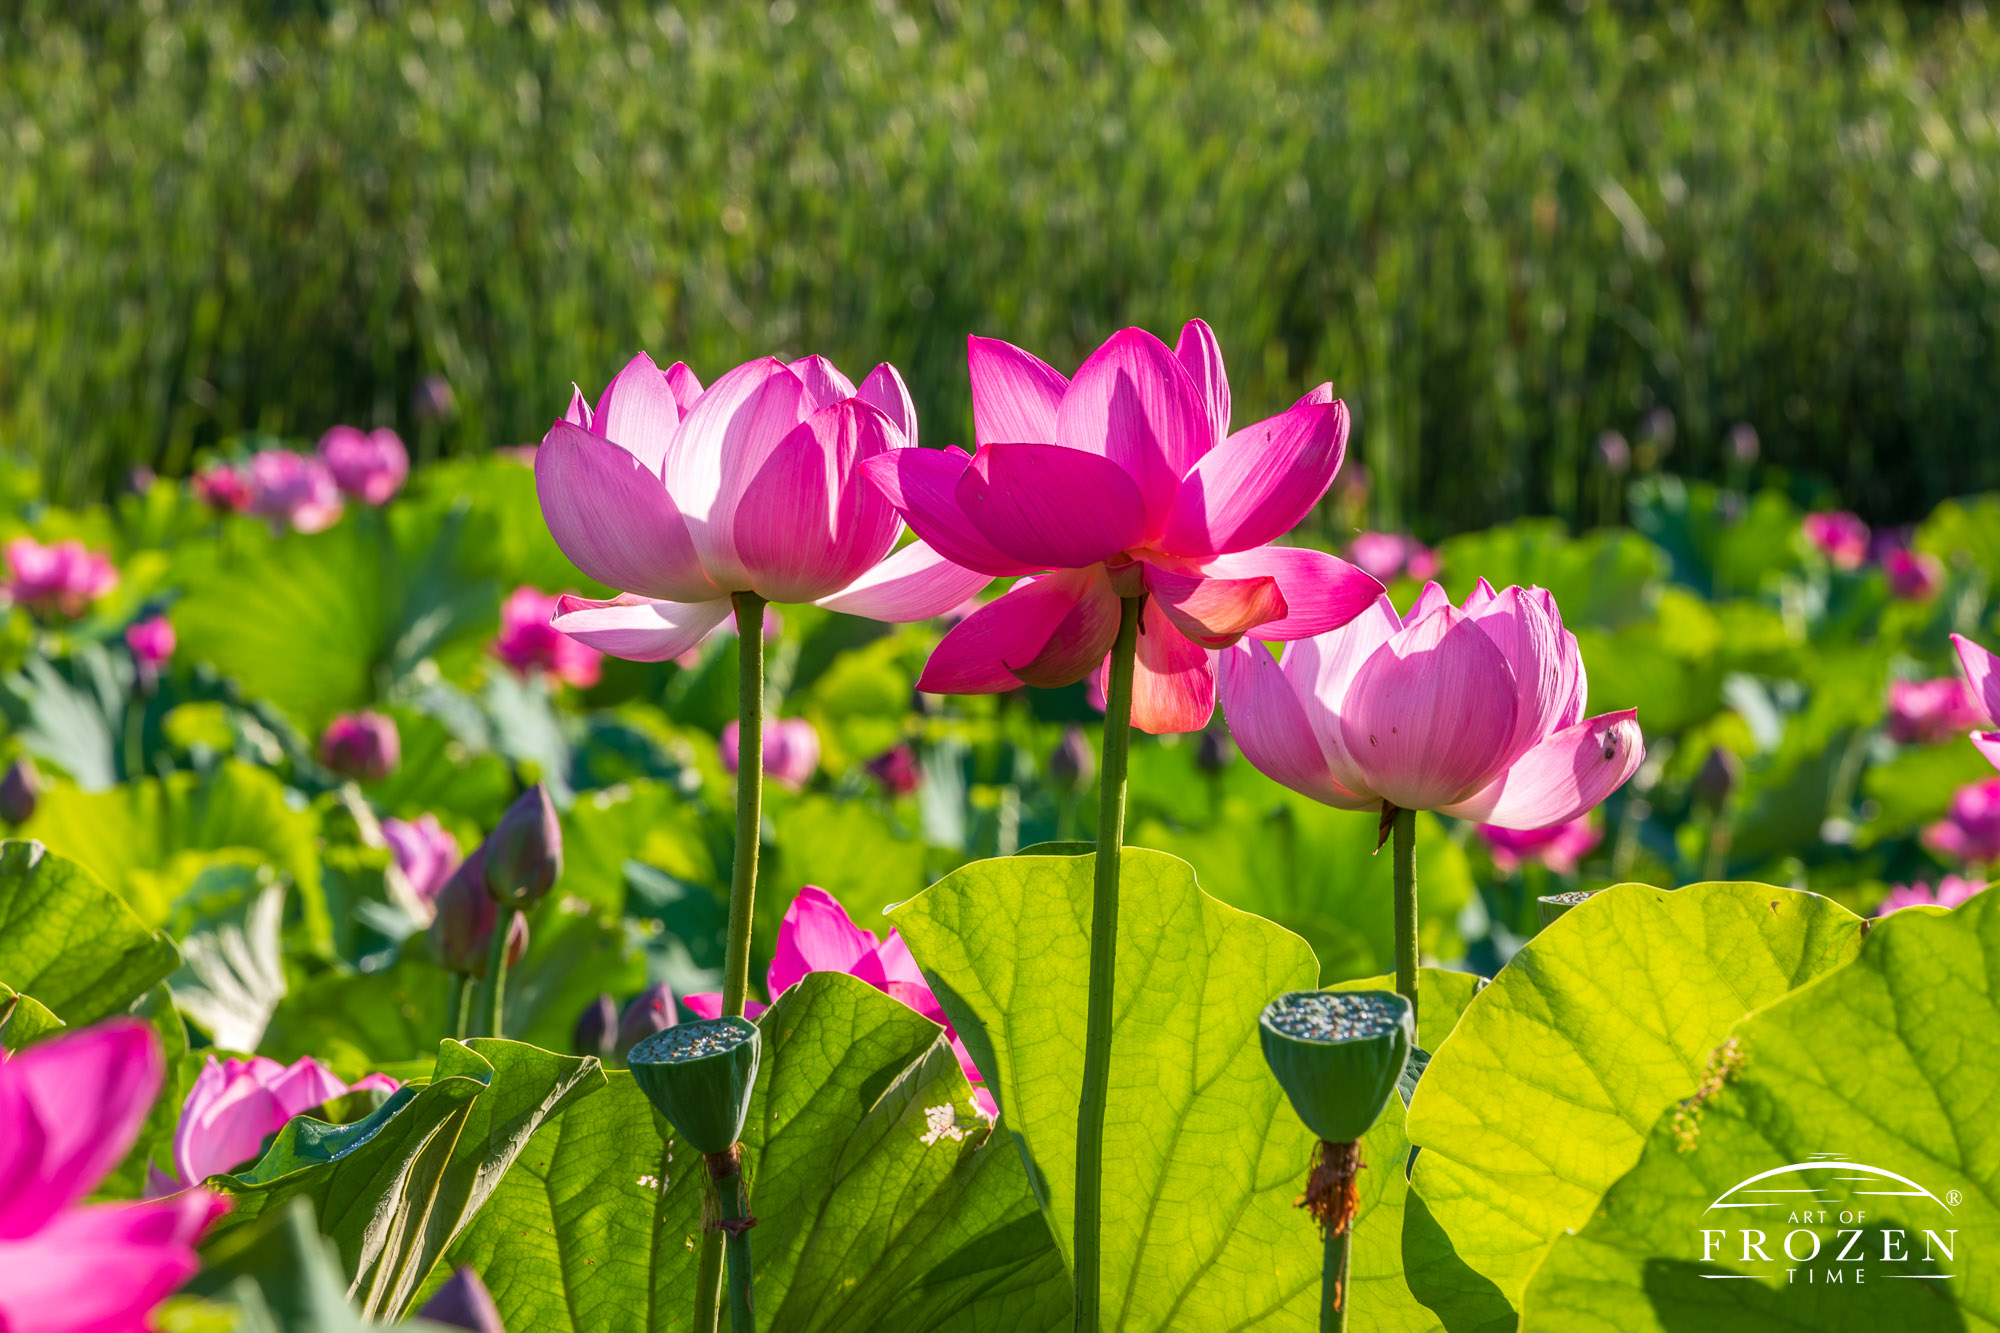 A bright pink flower called Sacred Lotus occupies a Liberty Township’s Wetlands Park